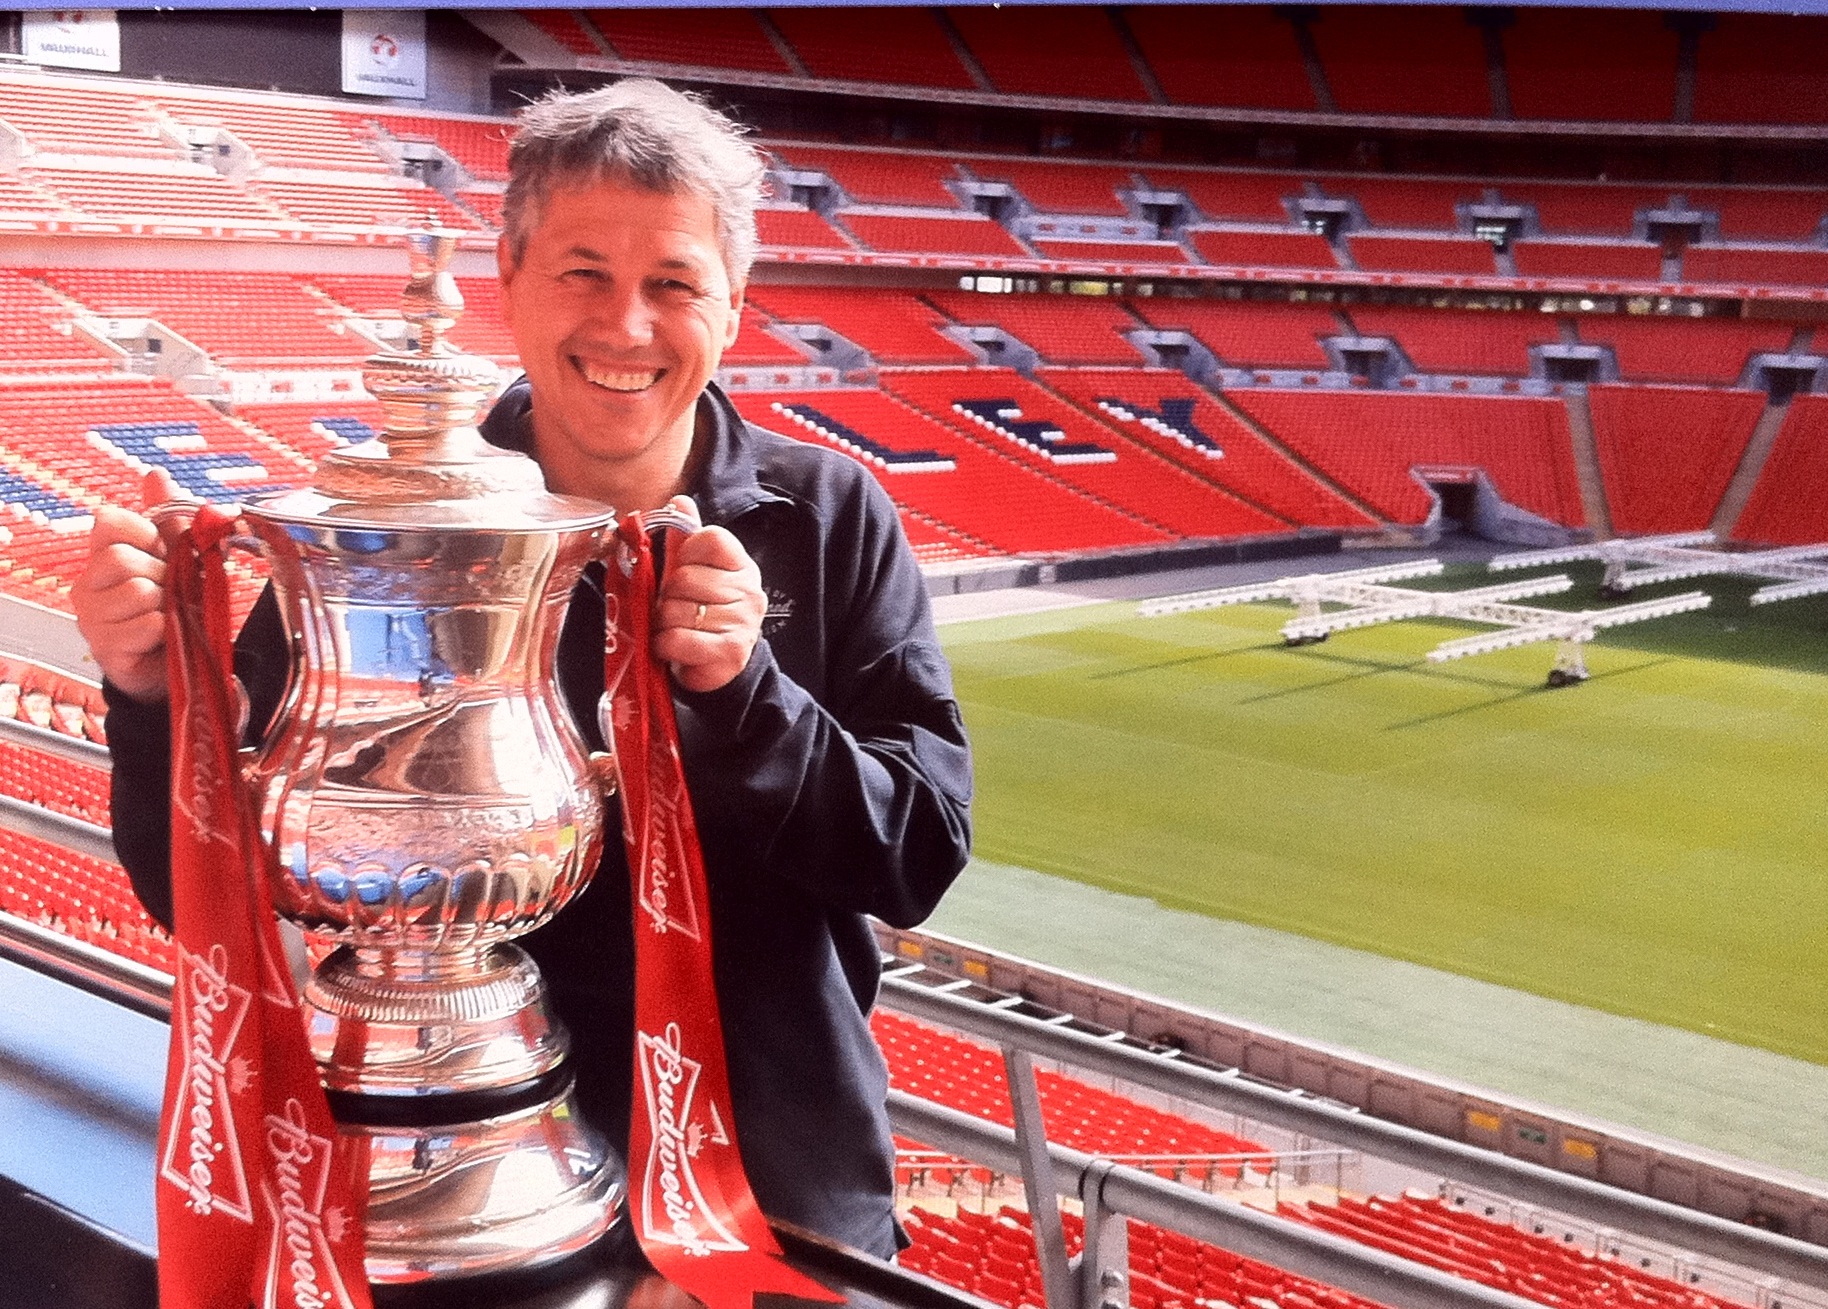 Old Fa Cup